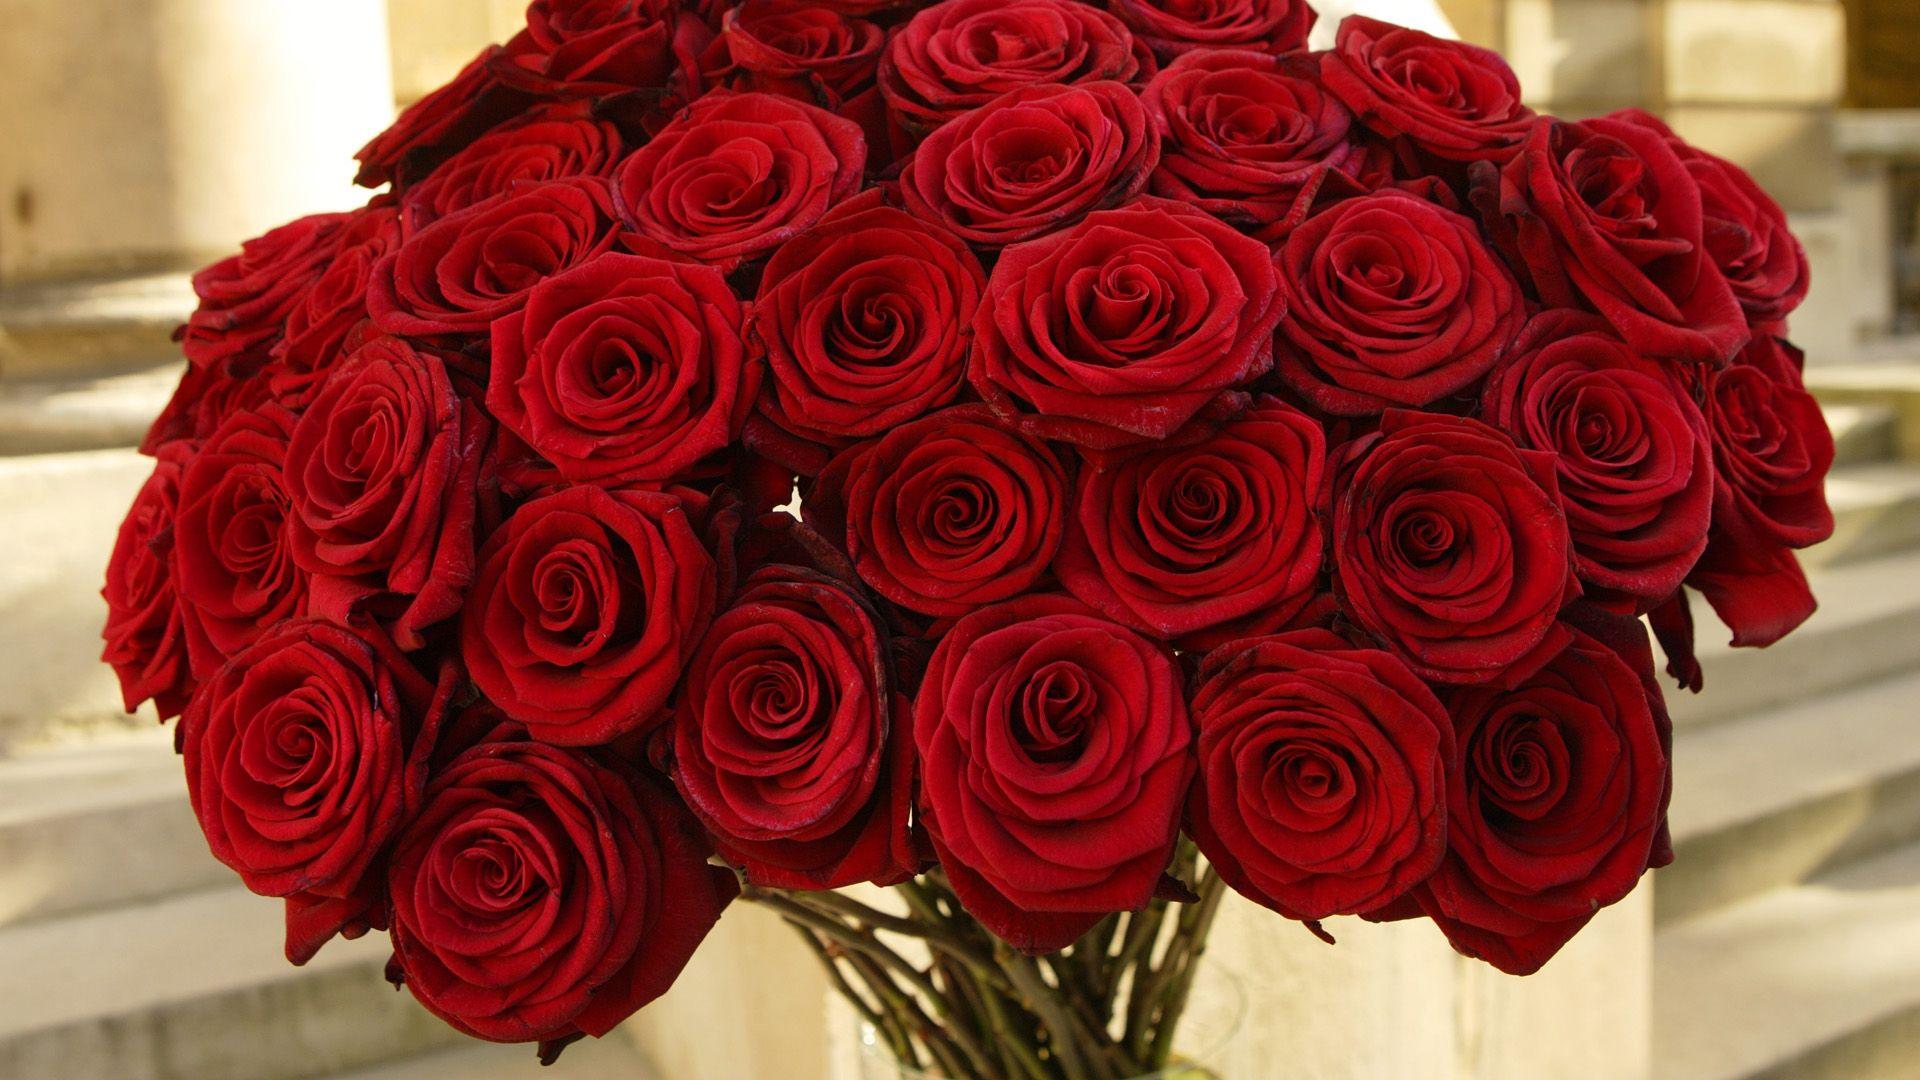 Red Roses HD Wallpapers - Top Free Red Roses HD Backgrounds ...